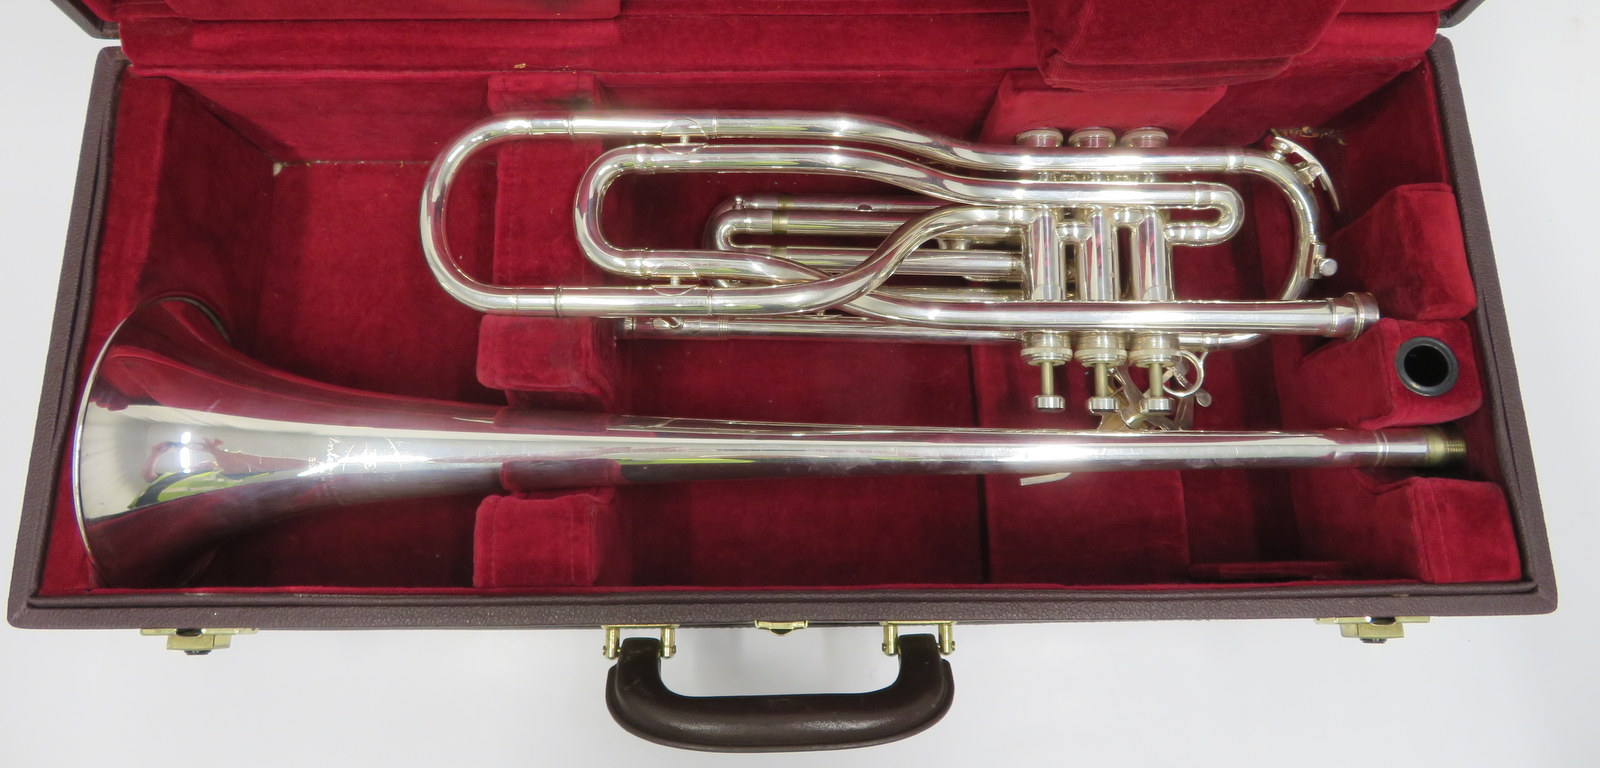 Besson International BE707 fanfare trumpet with case. Serial number: 884160. - Image 2 of 17